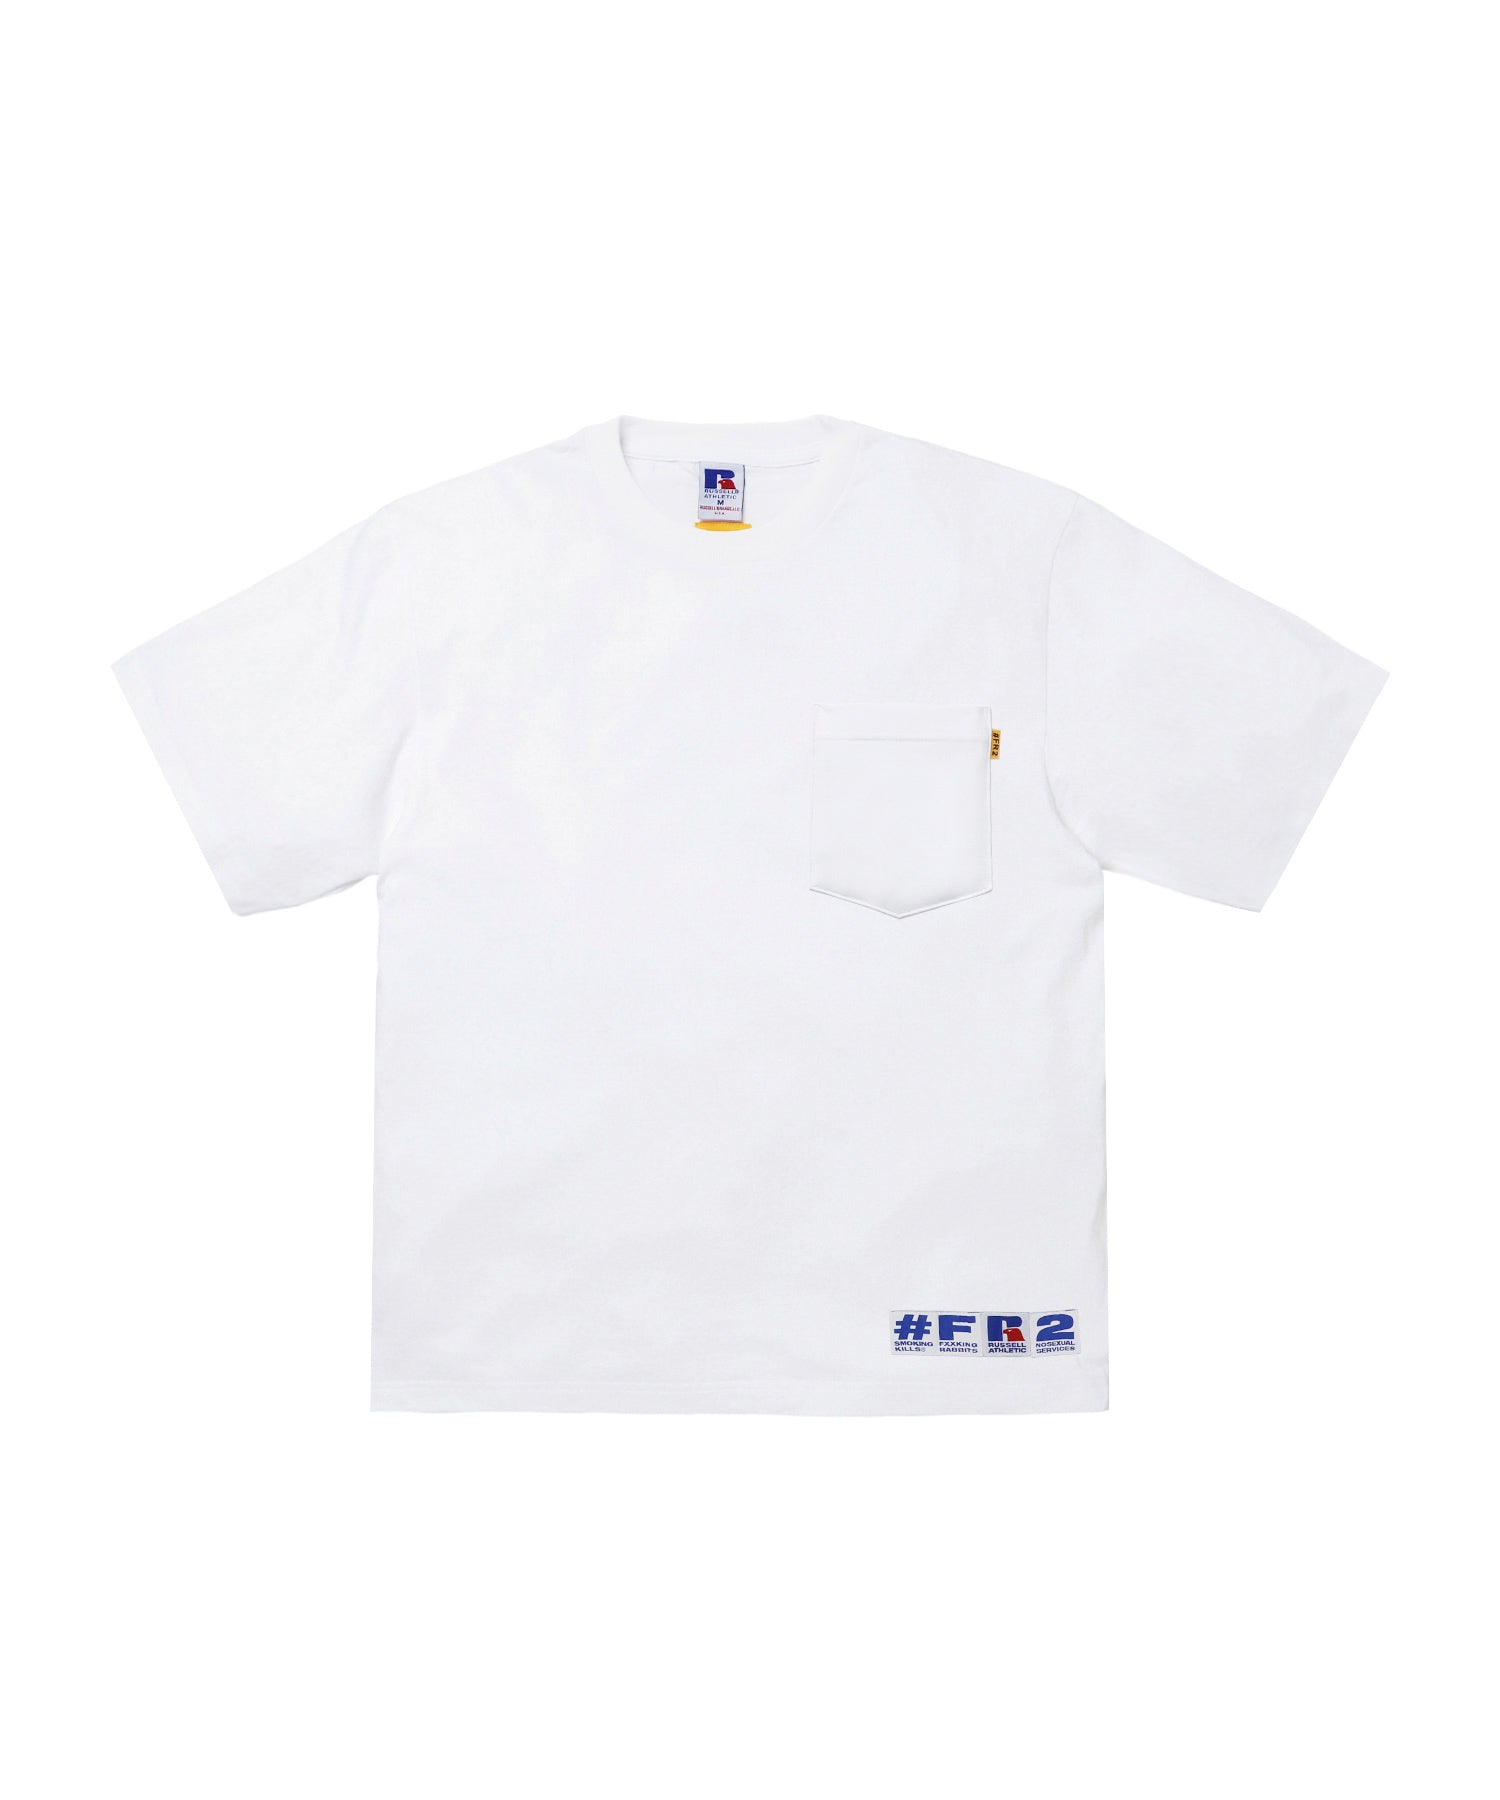 Russell collaboration with ♯FR2 Pocket T-shirt